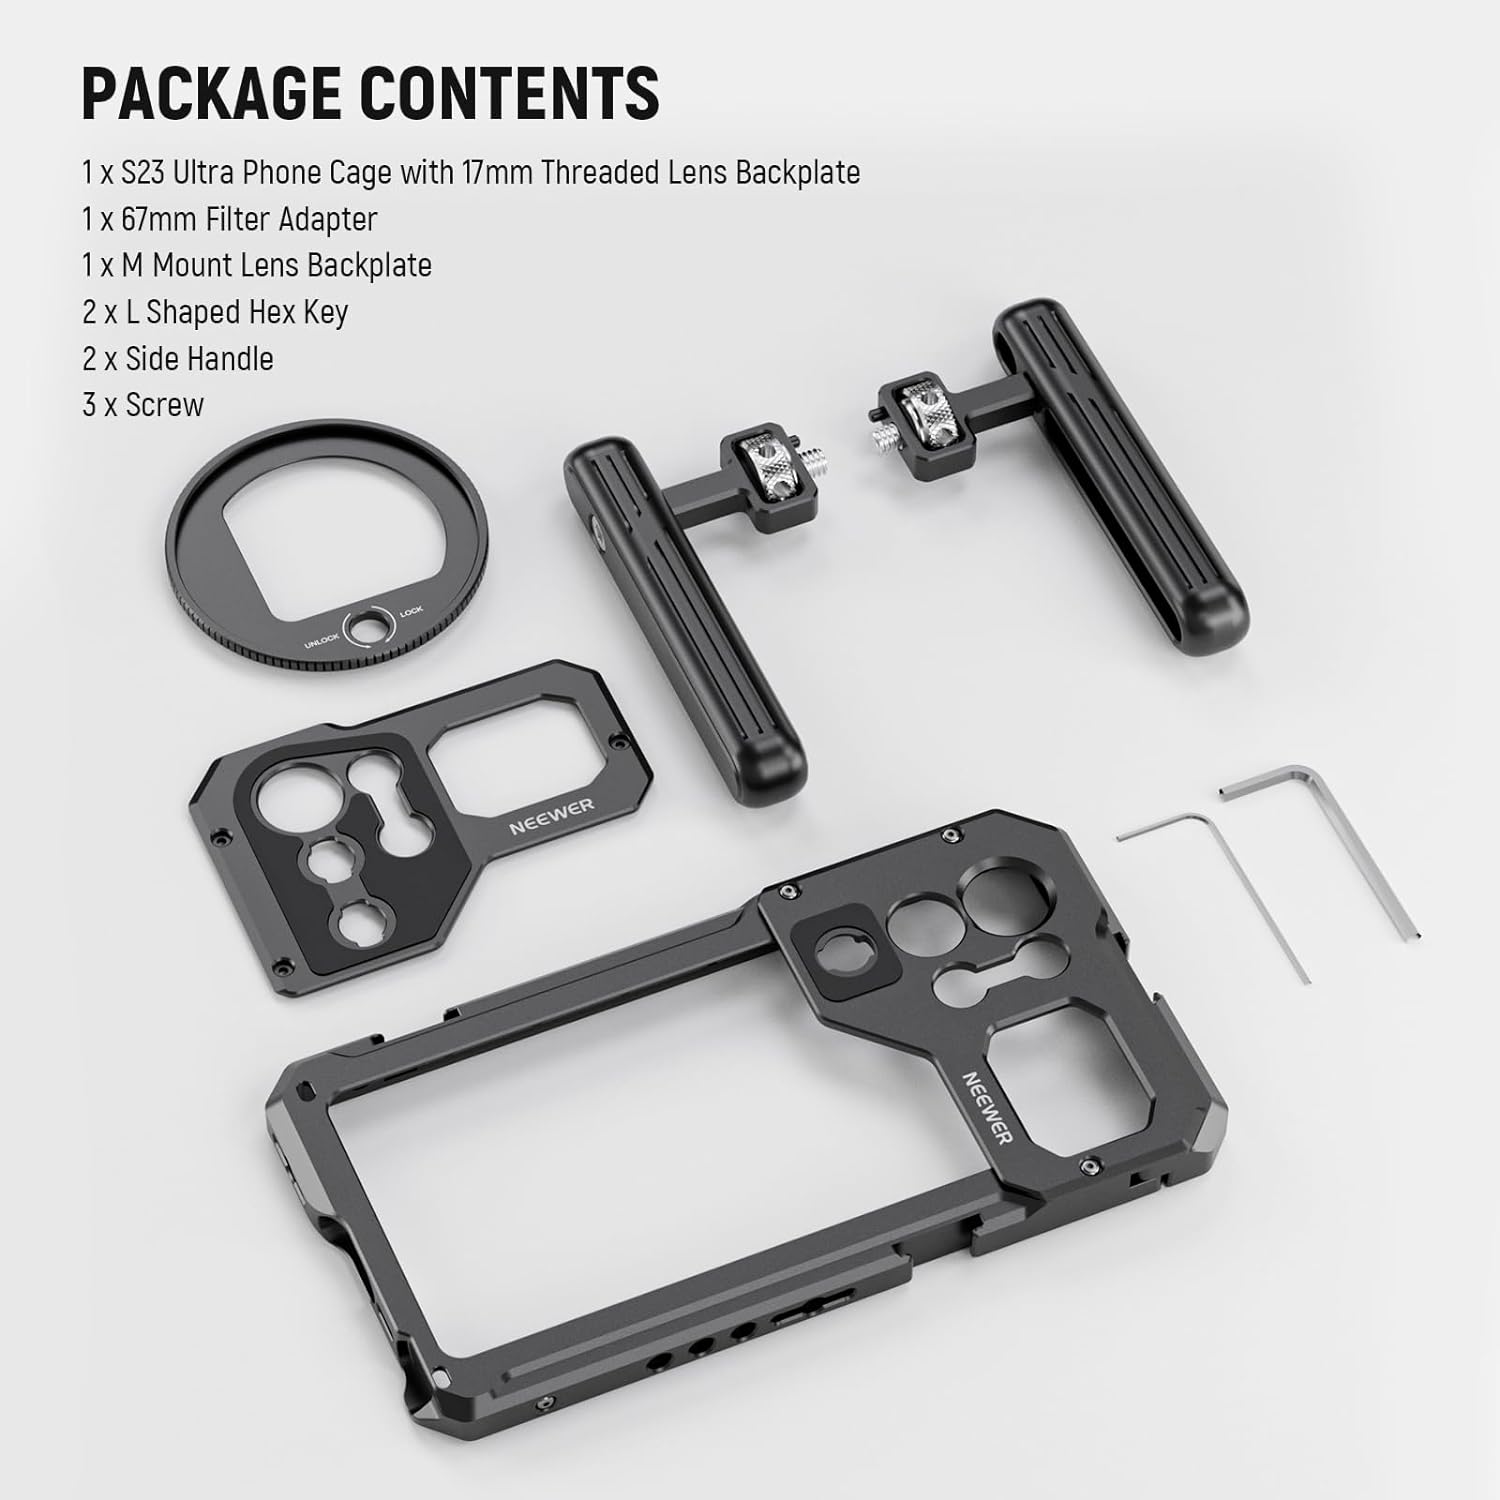 NEEWER Galaxy S23 Ultra Phone Cage Video Rig with Dual Side Handles, 67mm Threaded Filter Adapter, 17mm & M Mount Lens Backplates, Phone Stabilizer for Video Recording Filmmaking, PA021+PA033